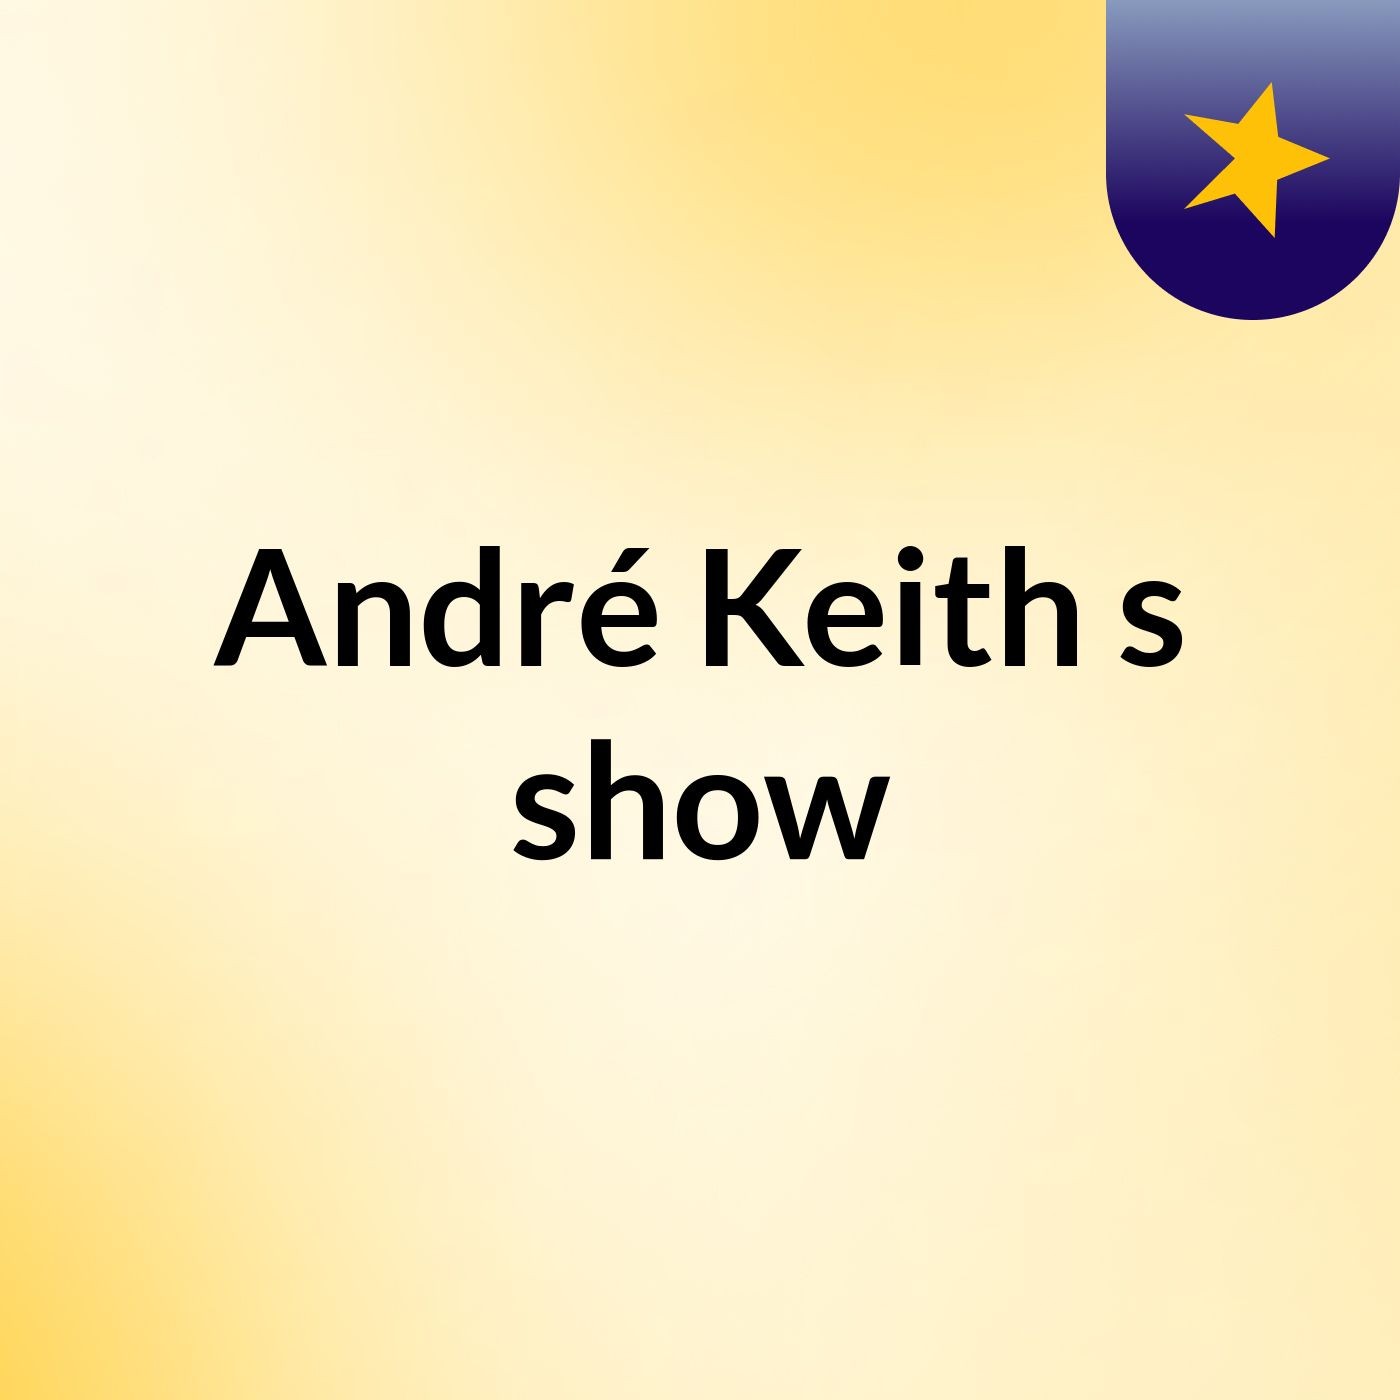 Episode 12 - André Keith's show